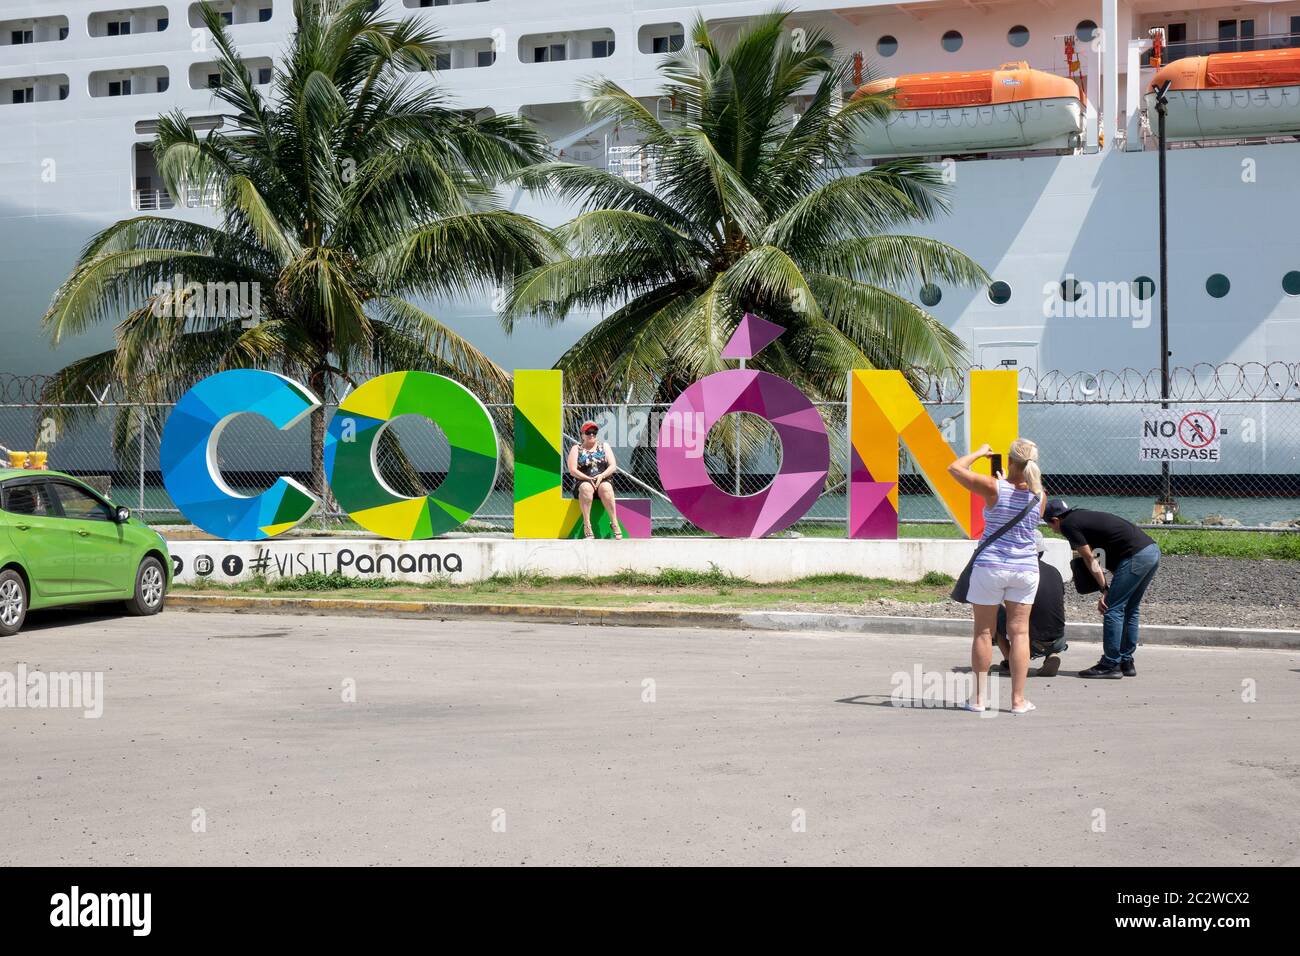 People Pose And Photograph At The Colon Panama 3D Sign At The Cruise Ship Terminal Republic Of Panama Stock Photo